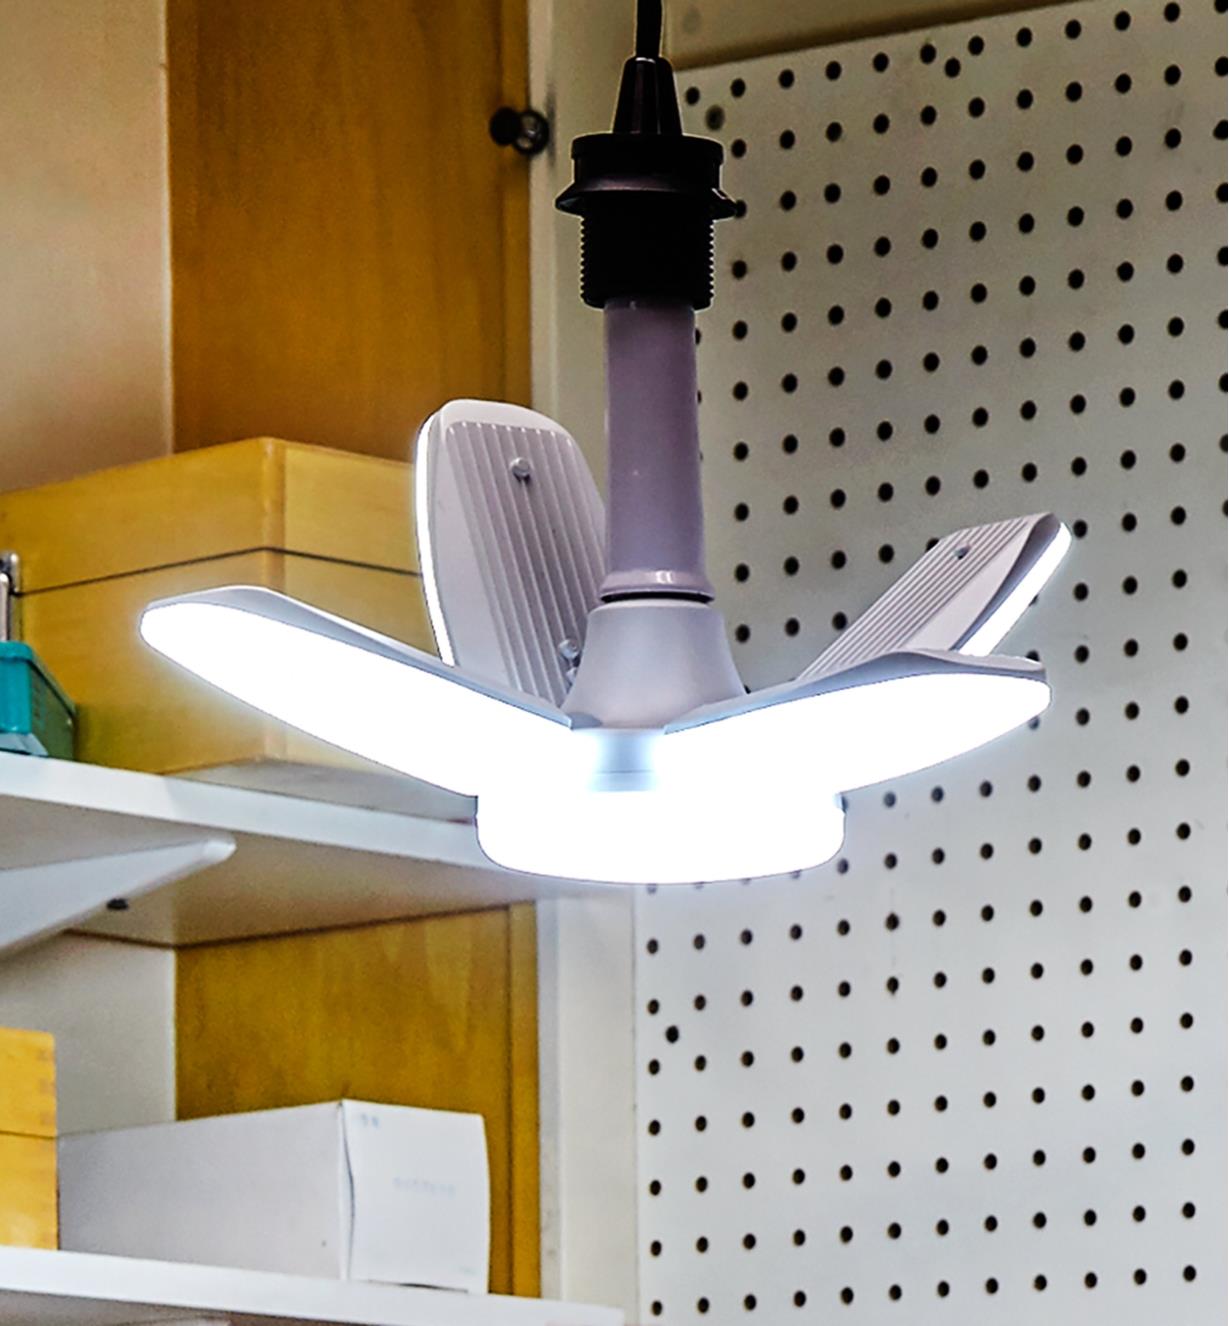 A directional LED ceiling light in a workshop, with two arms tilted up to illuminate the walls